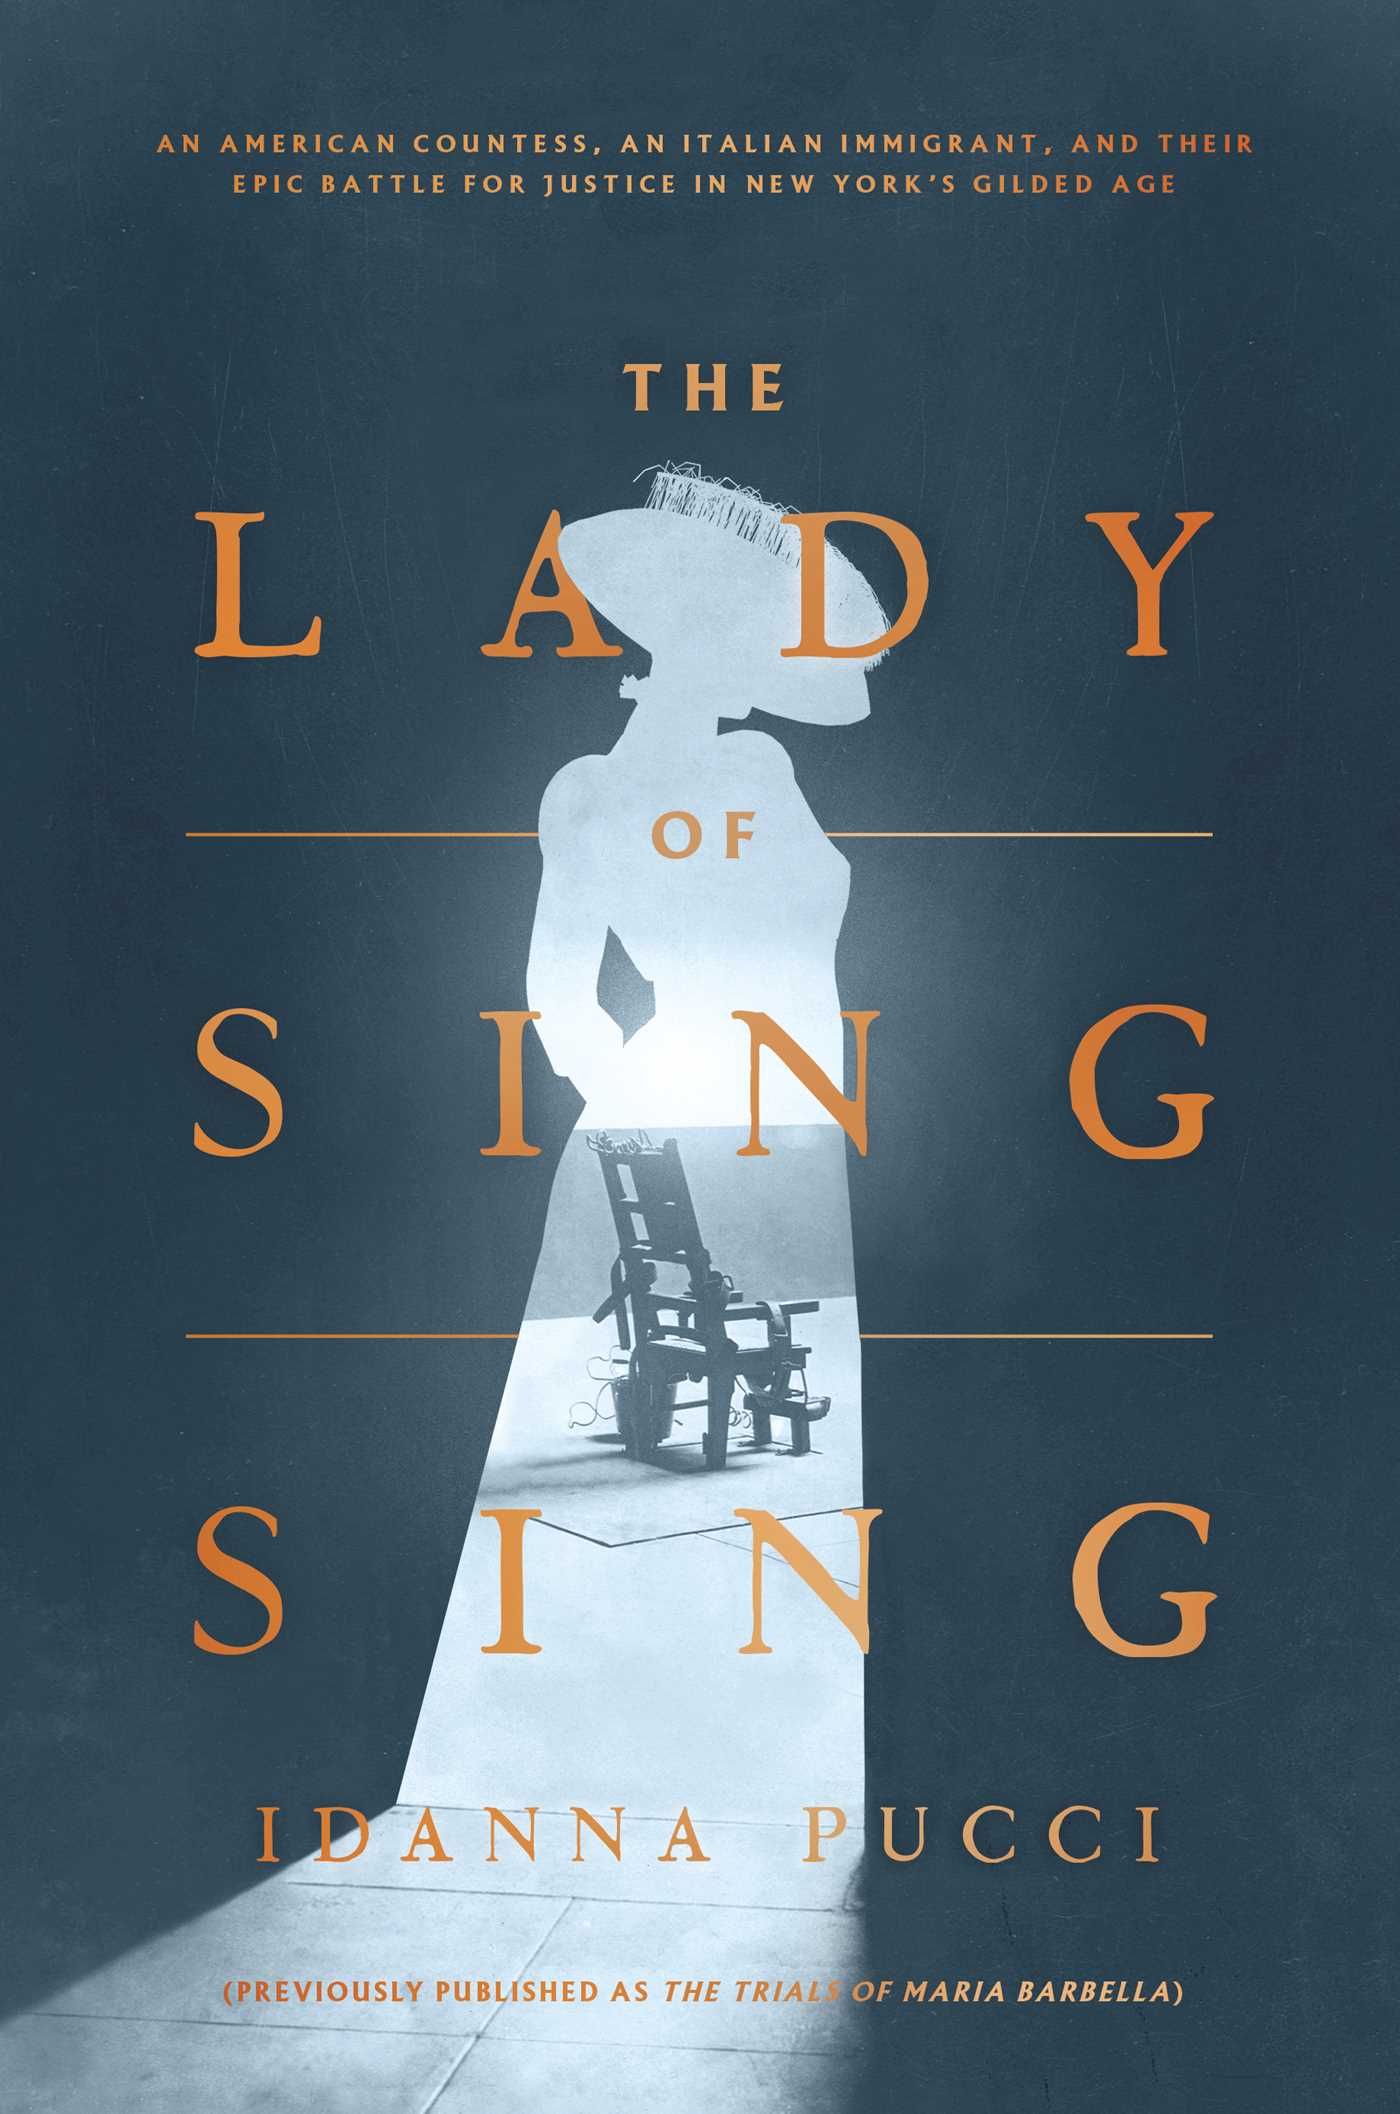 The Lady of Sing Sing An American Countess, an Italian Immigrant, and Their Epic Battle for Justice in New York's Gilded Age By Idanna Pucci